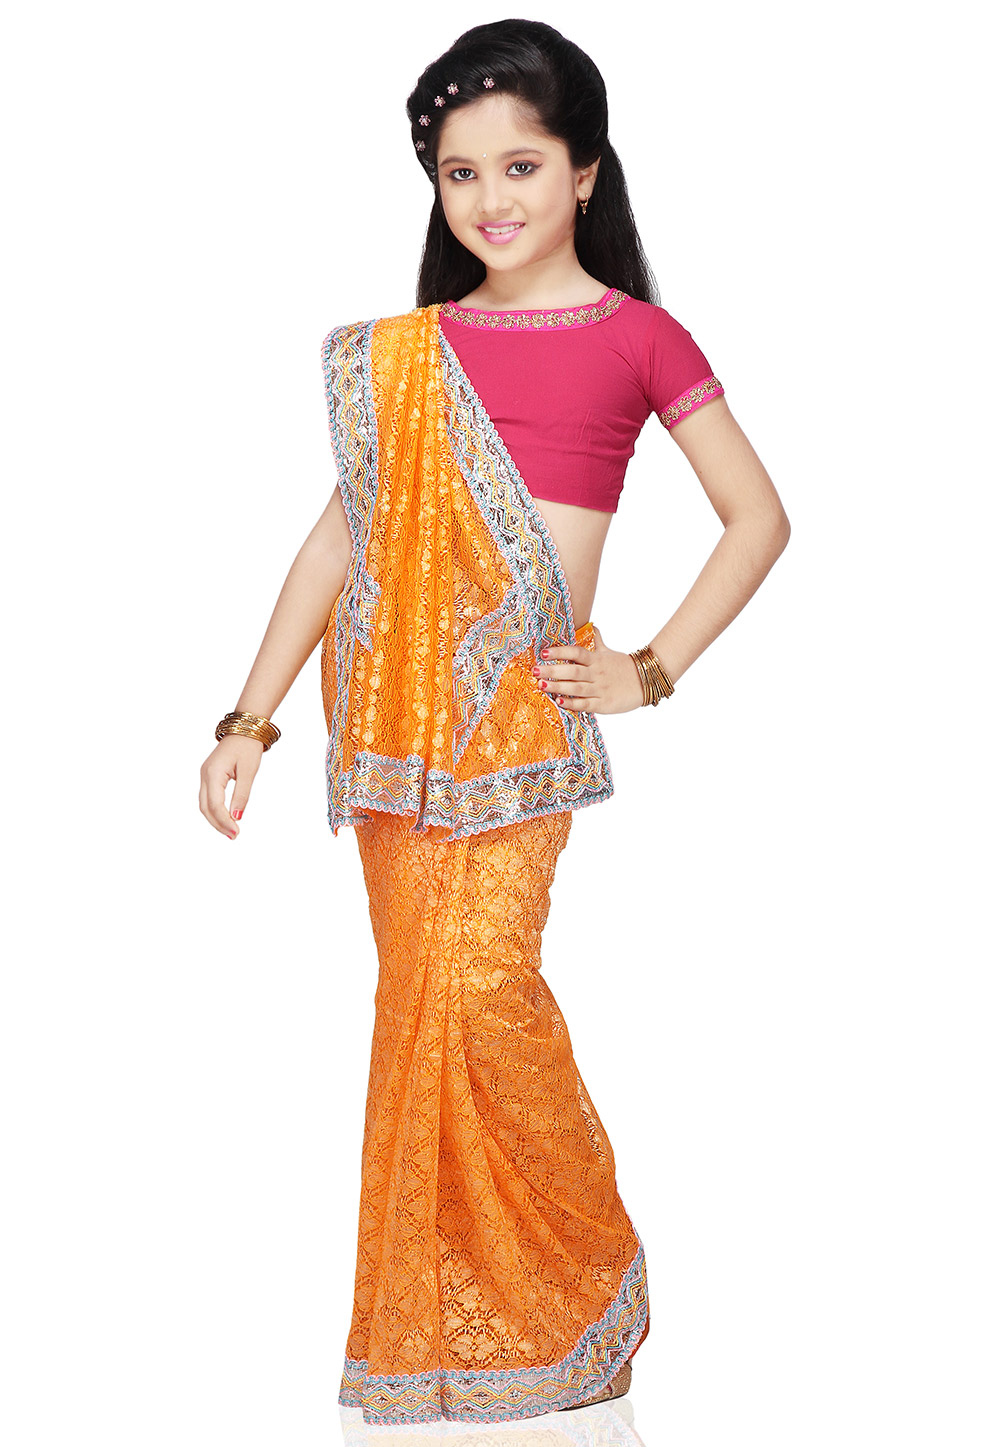 Varieties of Indian Clothes for Kids  Indian Clothing, Indian Dresses and Indian  Fashion Trends